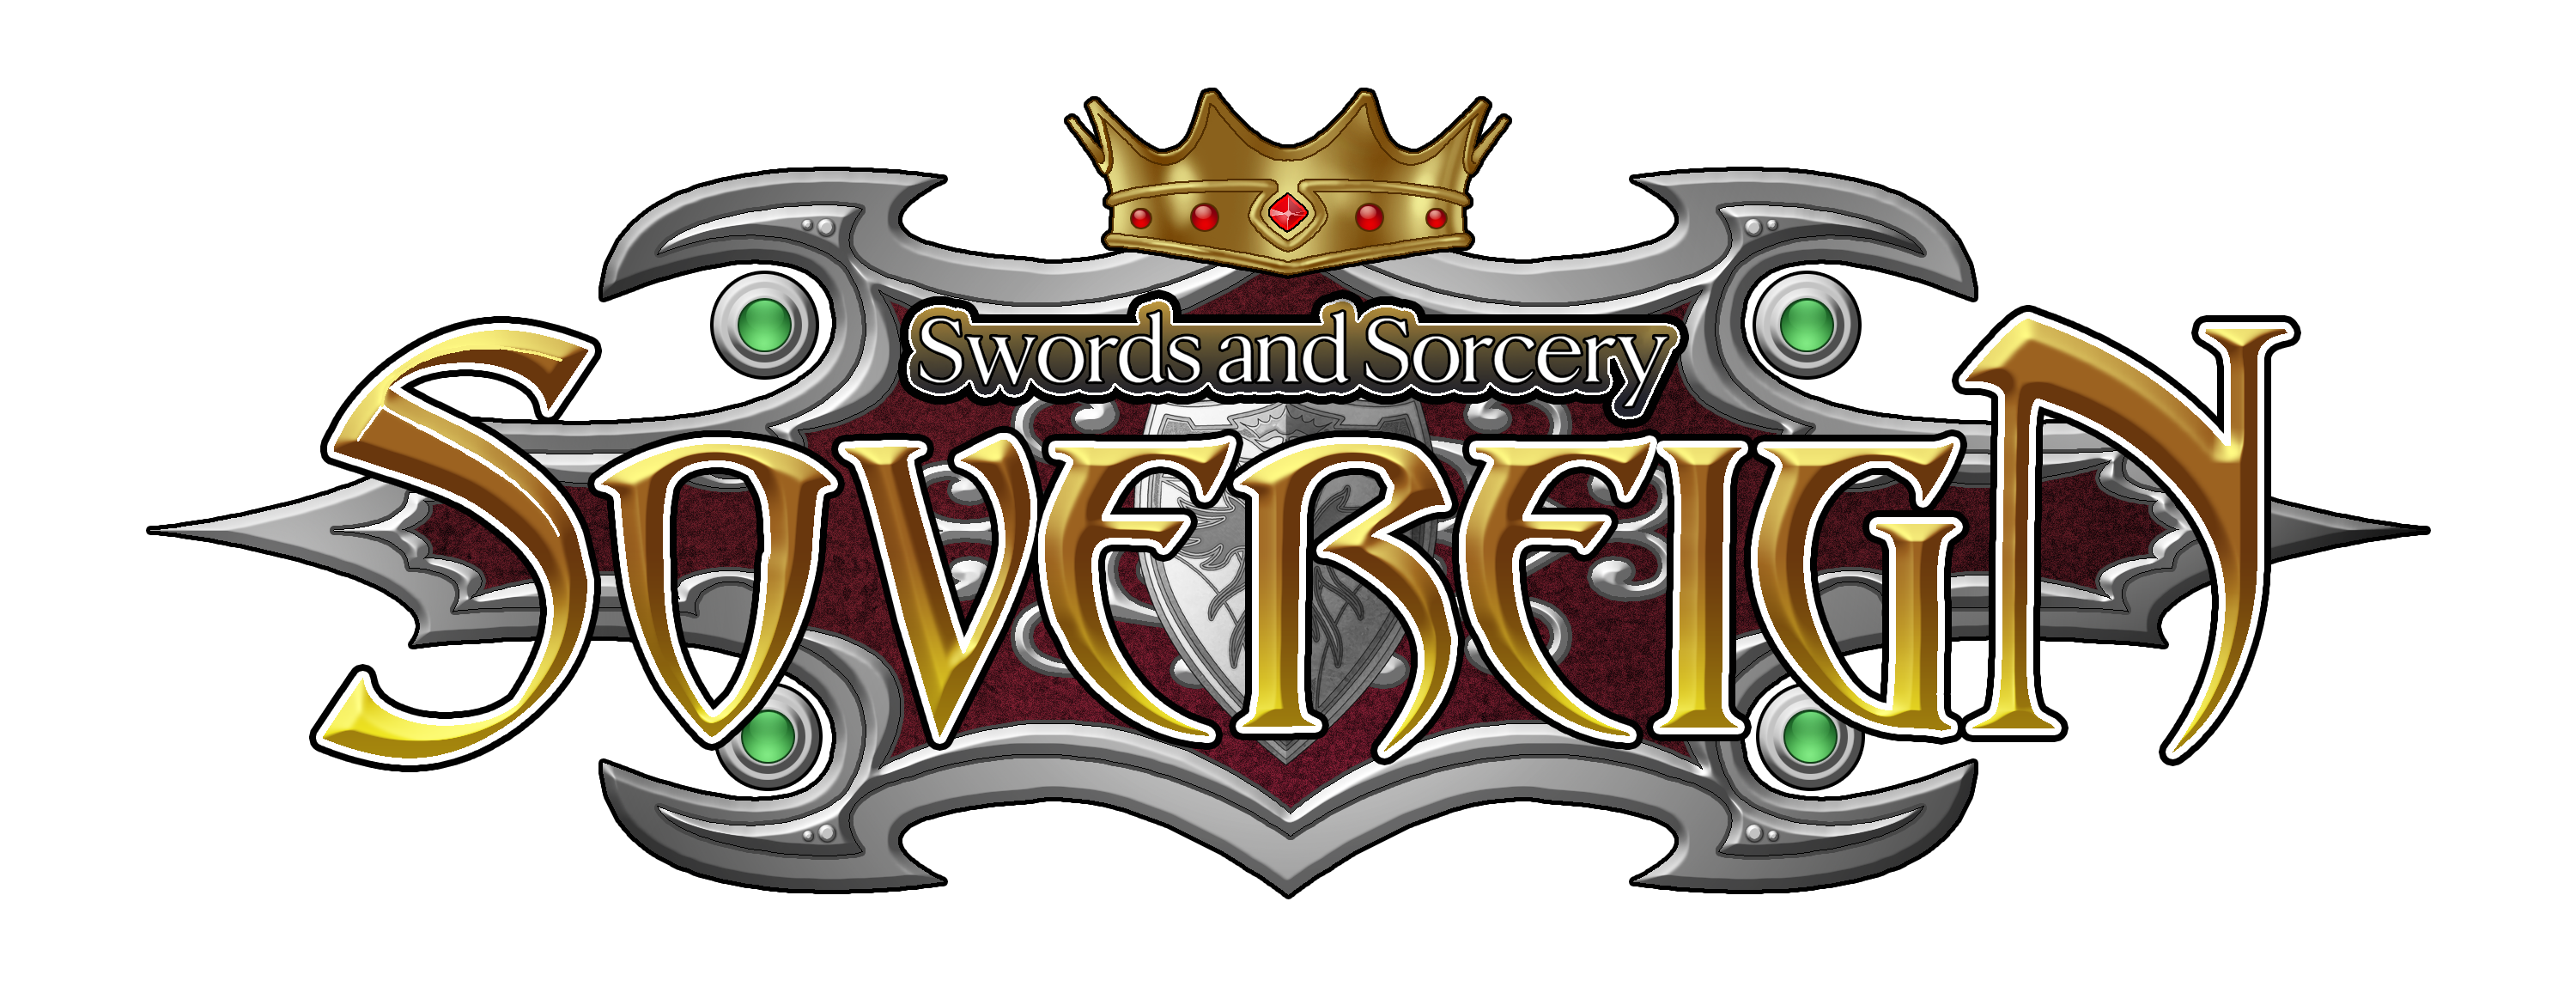 Swords and Sorcery - Sovereign